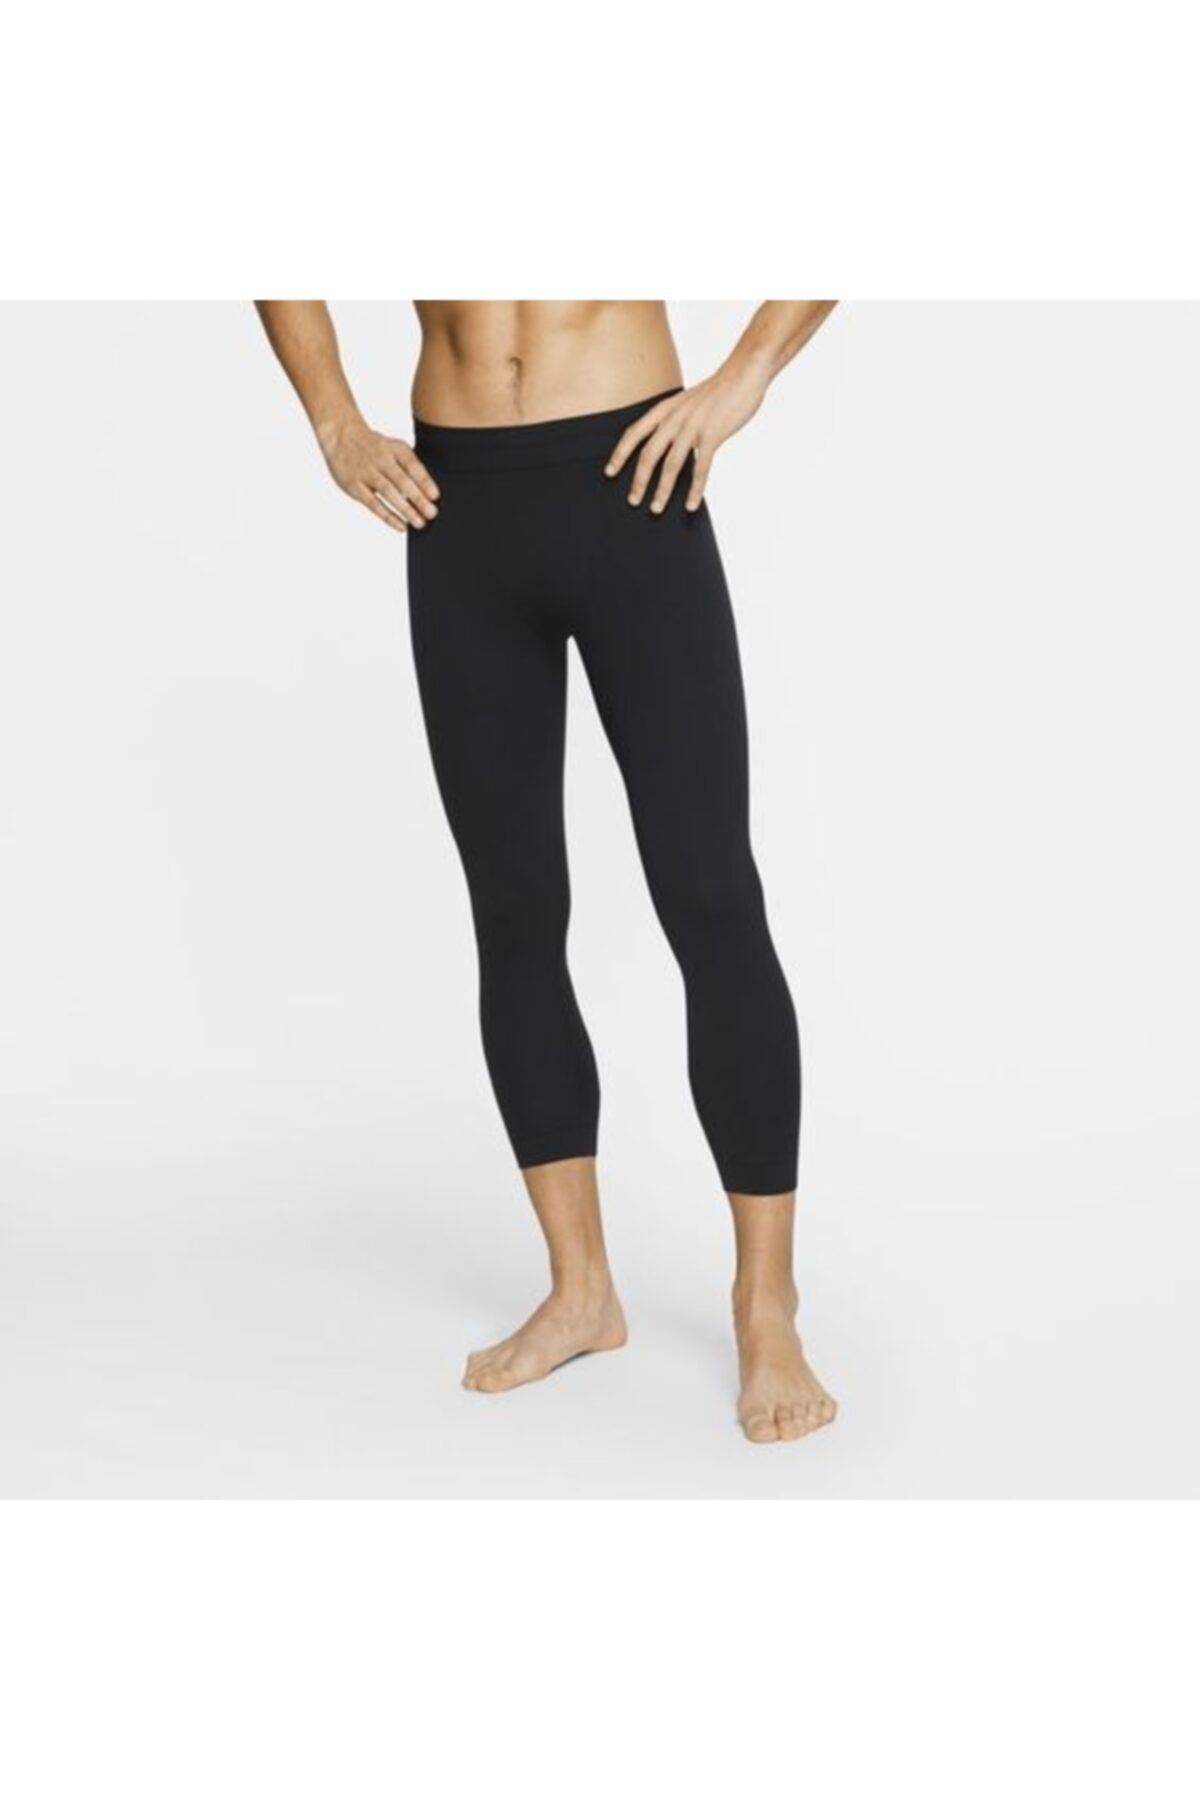  Nike Yoga Men's 3/4 Tights CT1830-010 Size 3XL Black/Iron Grey  : Clothing, Shoes & Jewelry